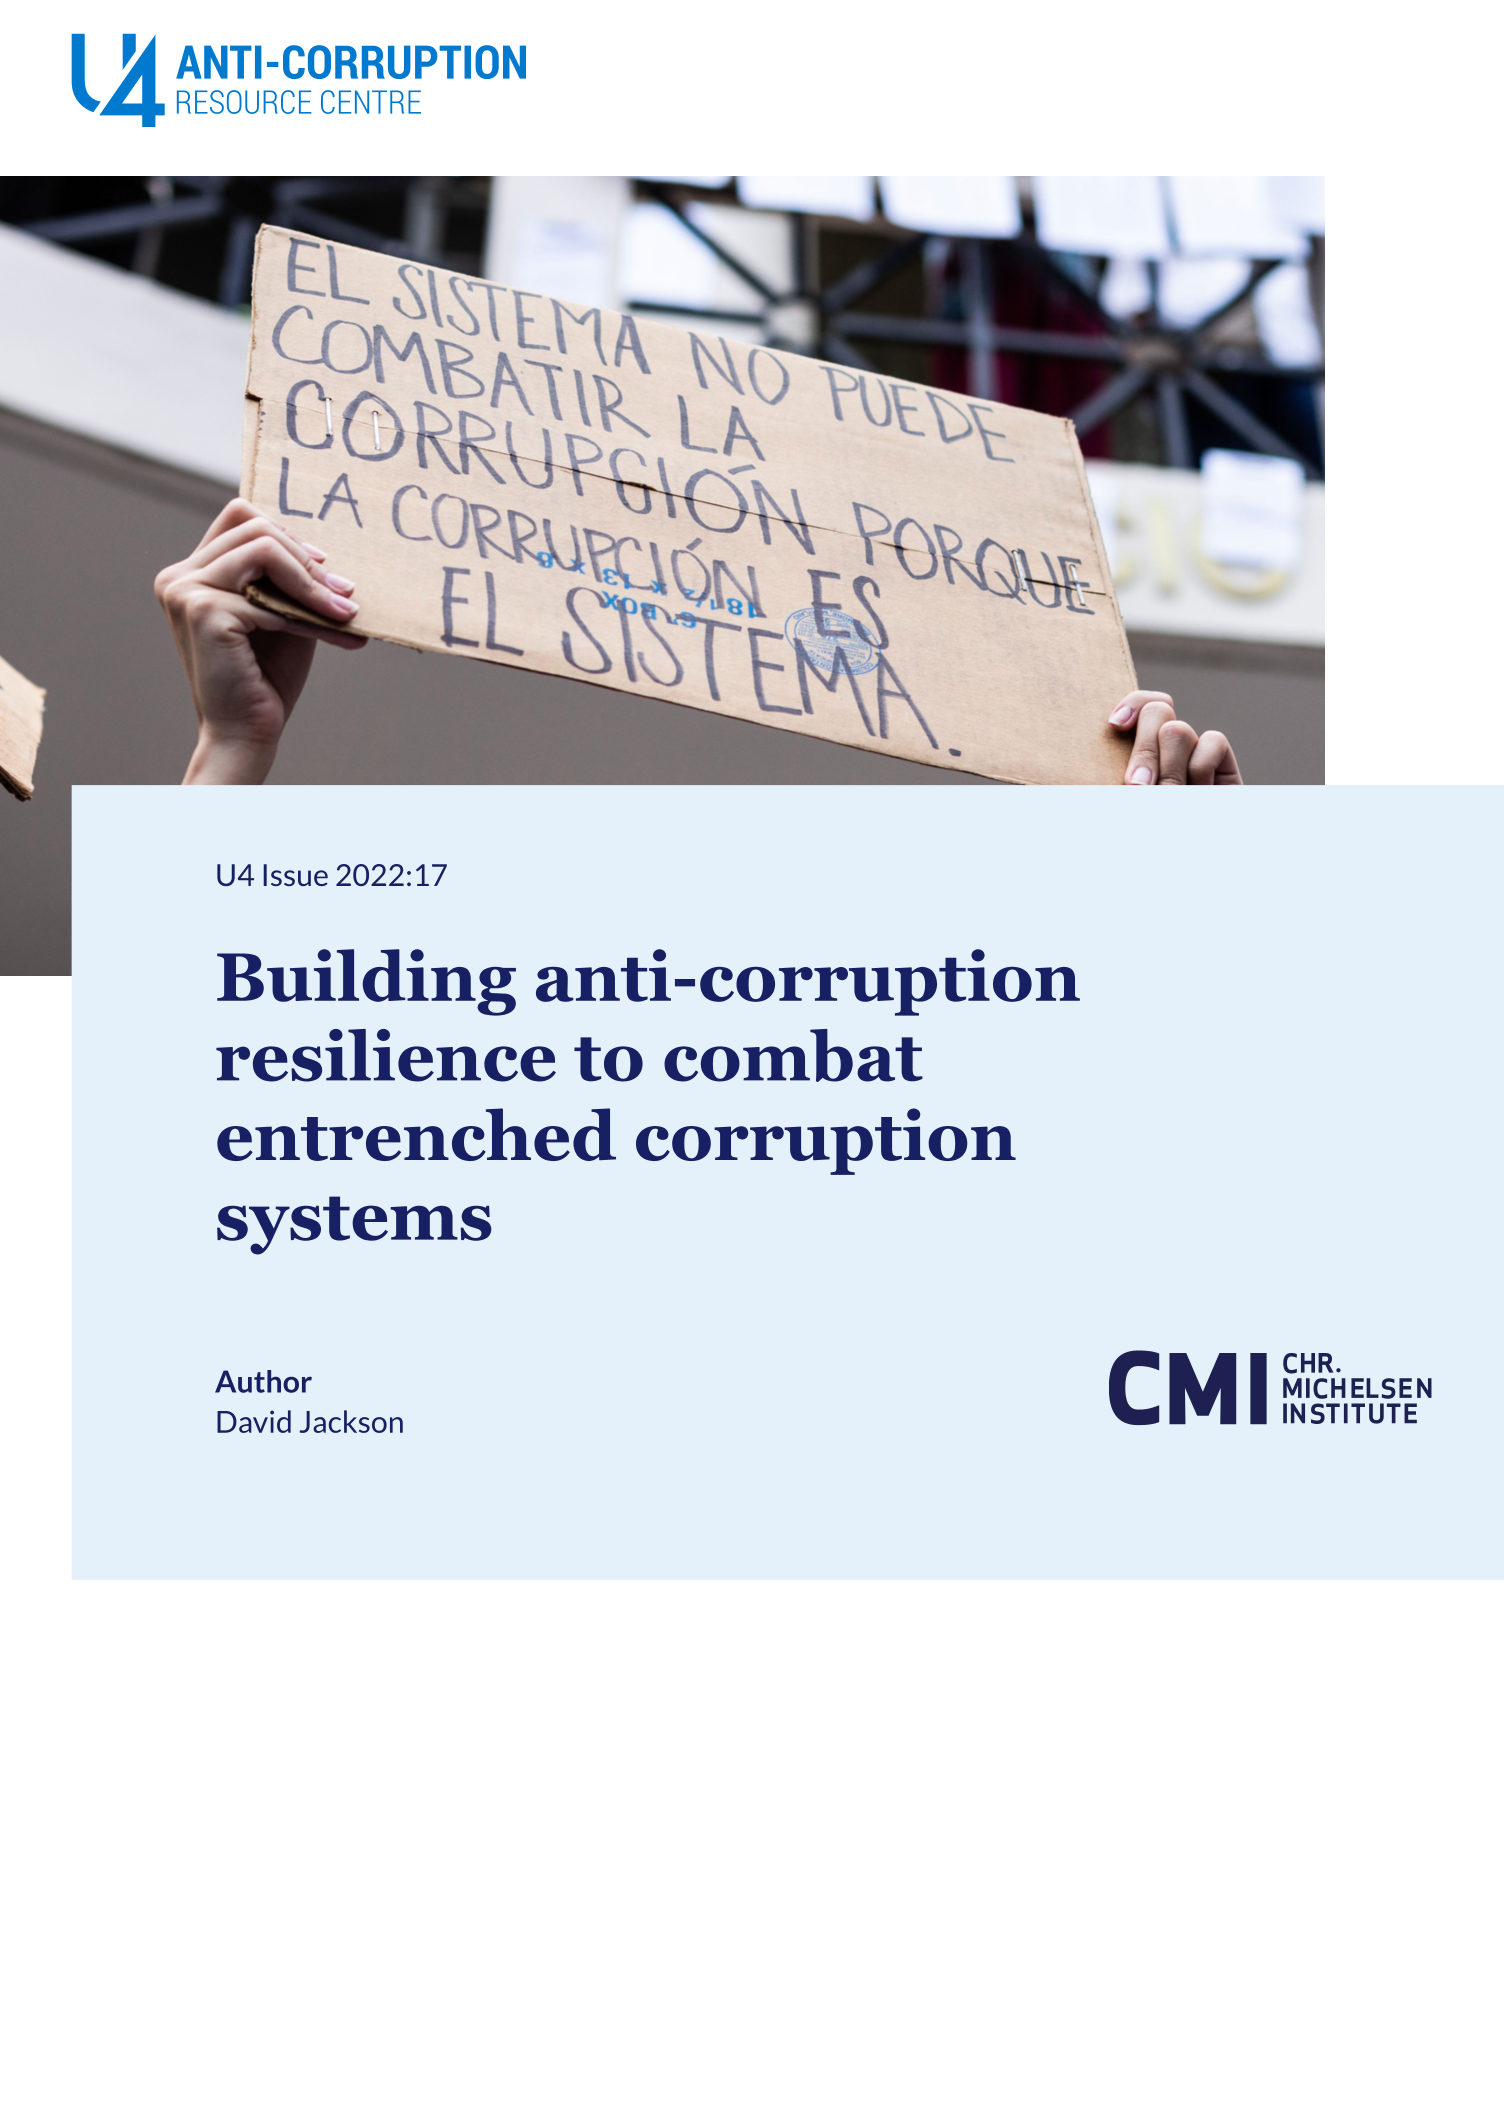 Building anti-corruption resilience to combat entrenched corruption systems